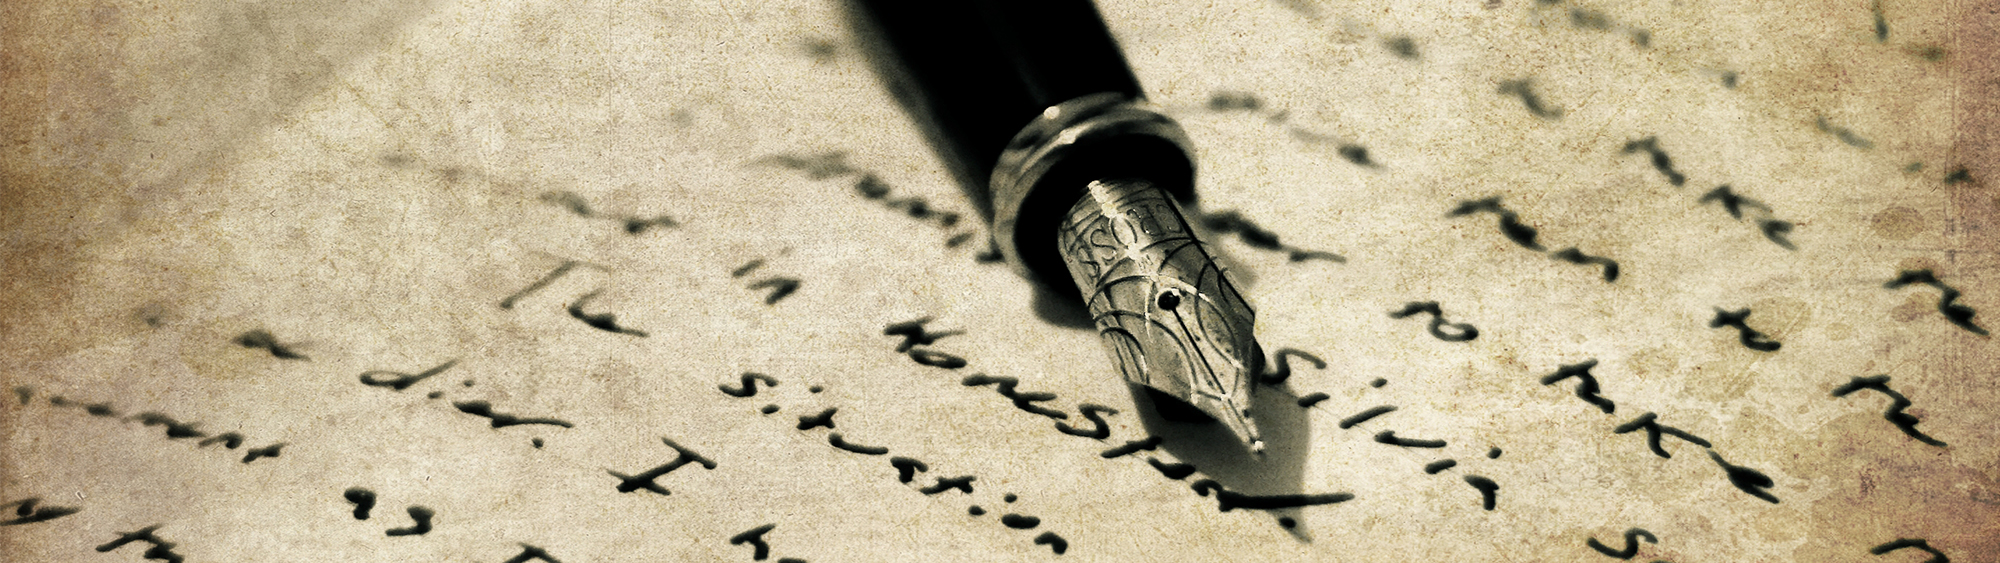 Photo of a pen and writing on a page.